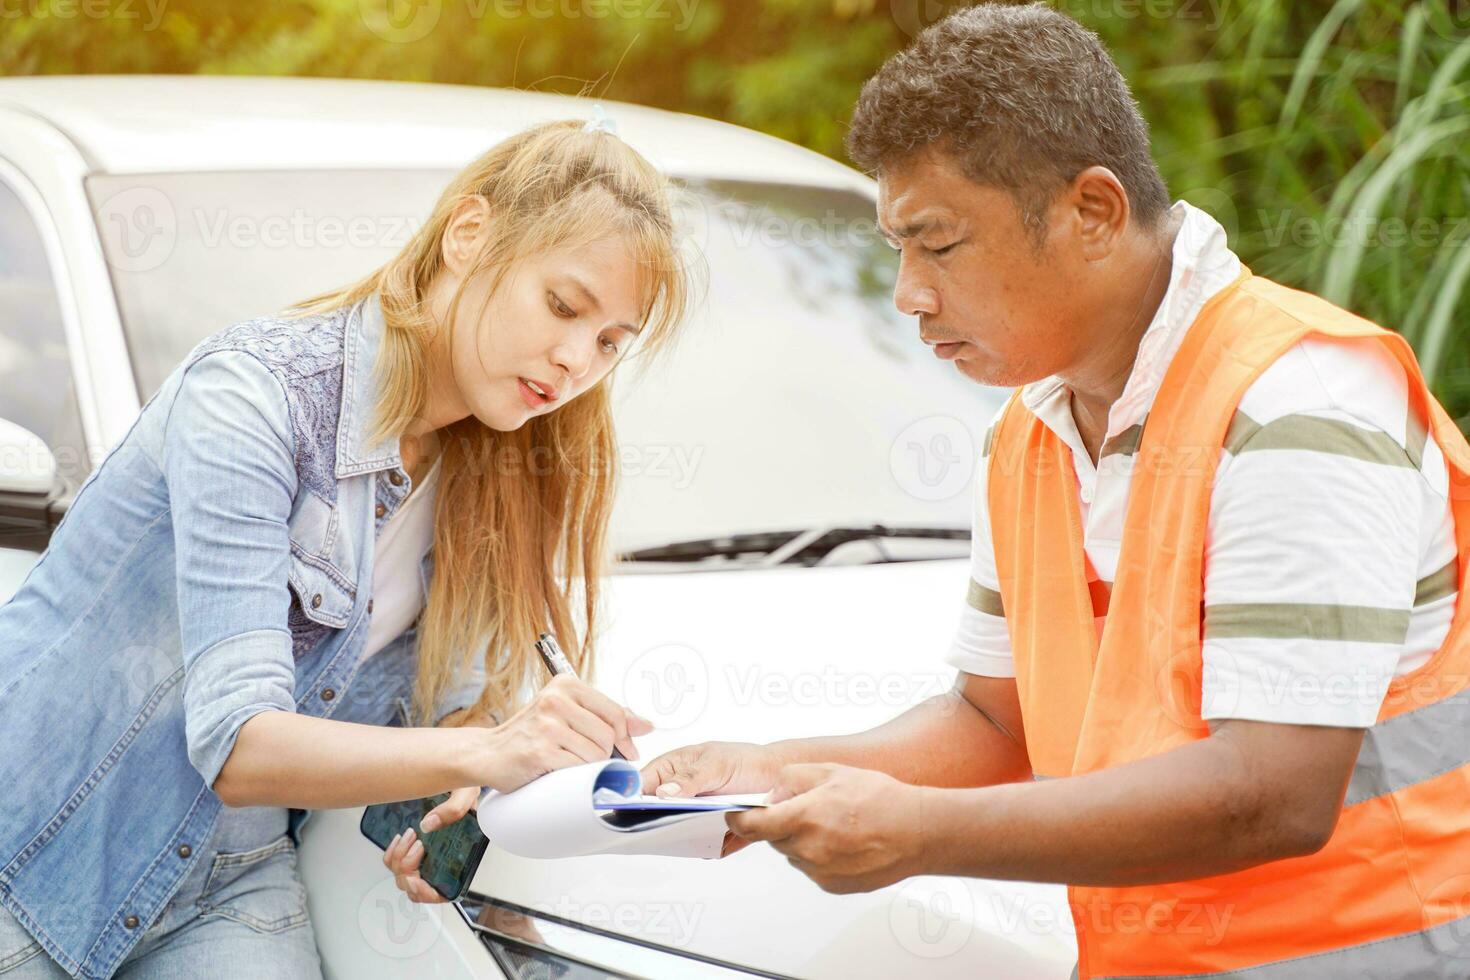 The insurance agent inspects the damaged vehicle and The customer signs the filing of the post-accident claim report form. Traffic accident and insurance concept photo